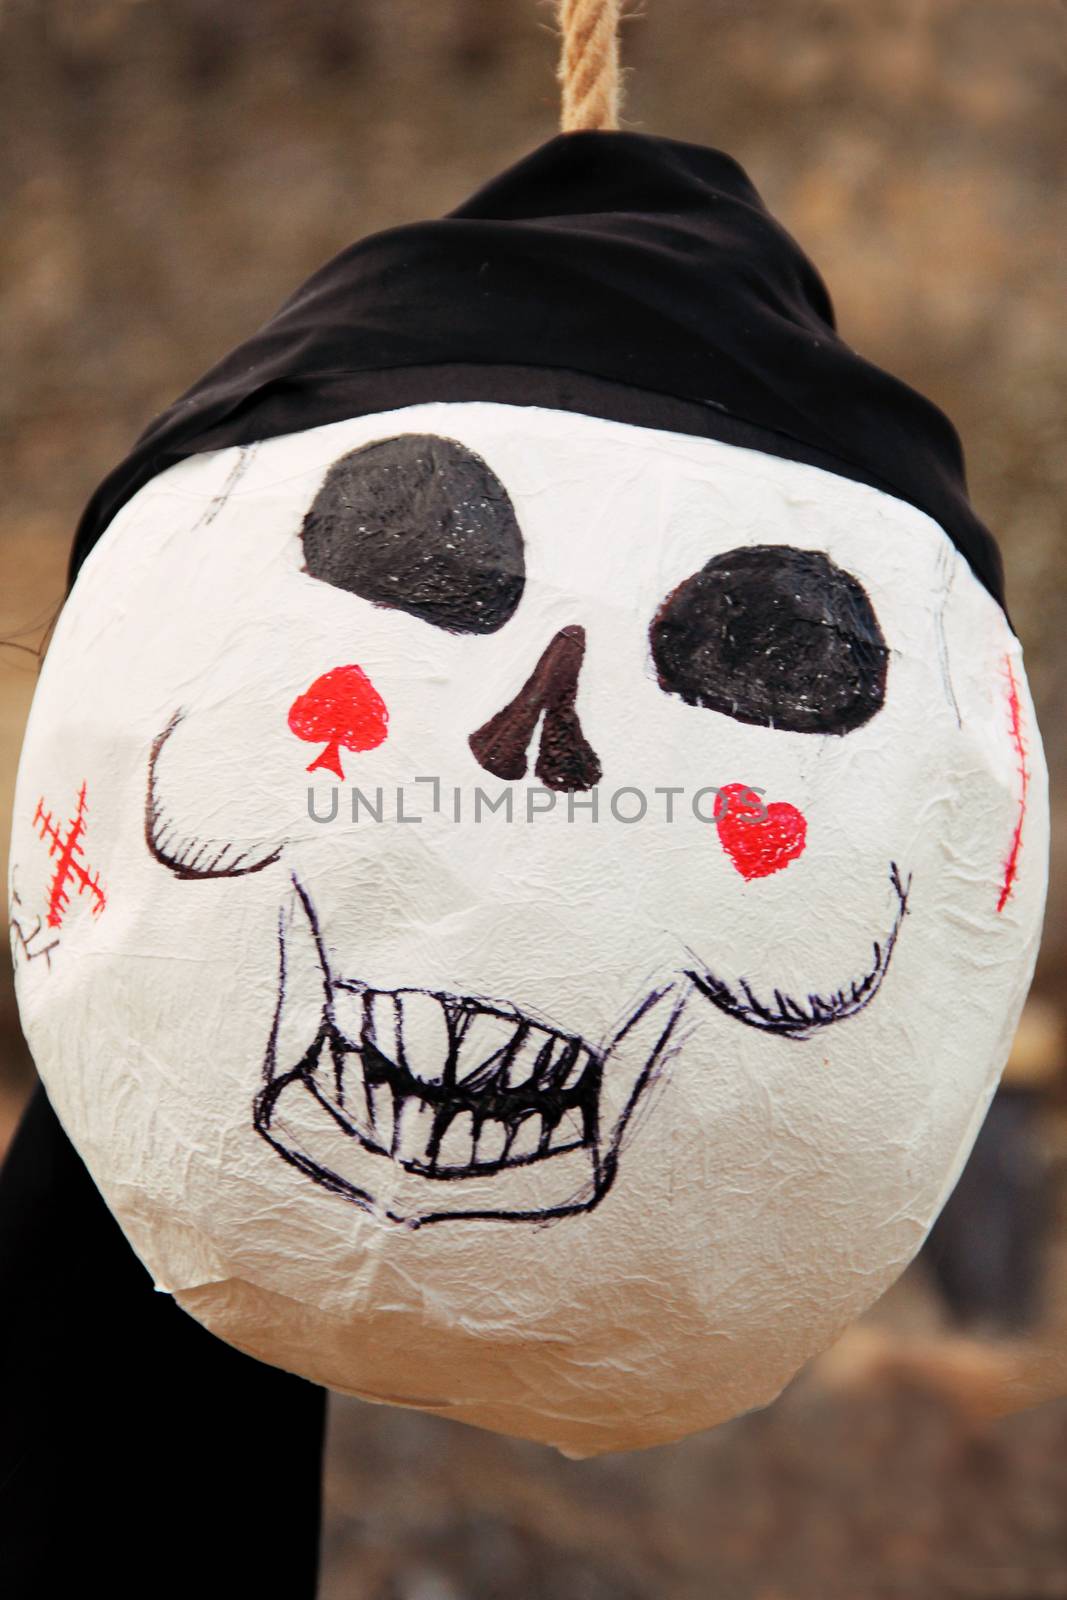 ball of paper as skull for pirate party or Halloween. photo